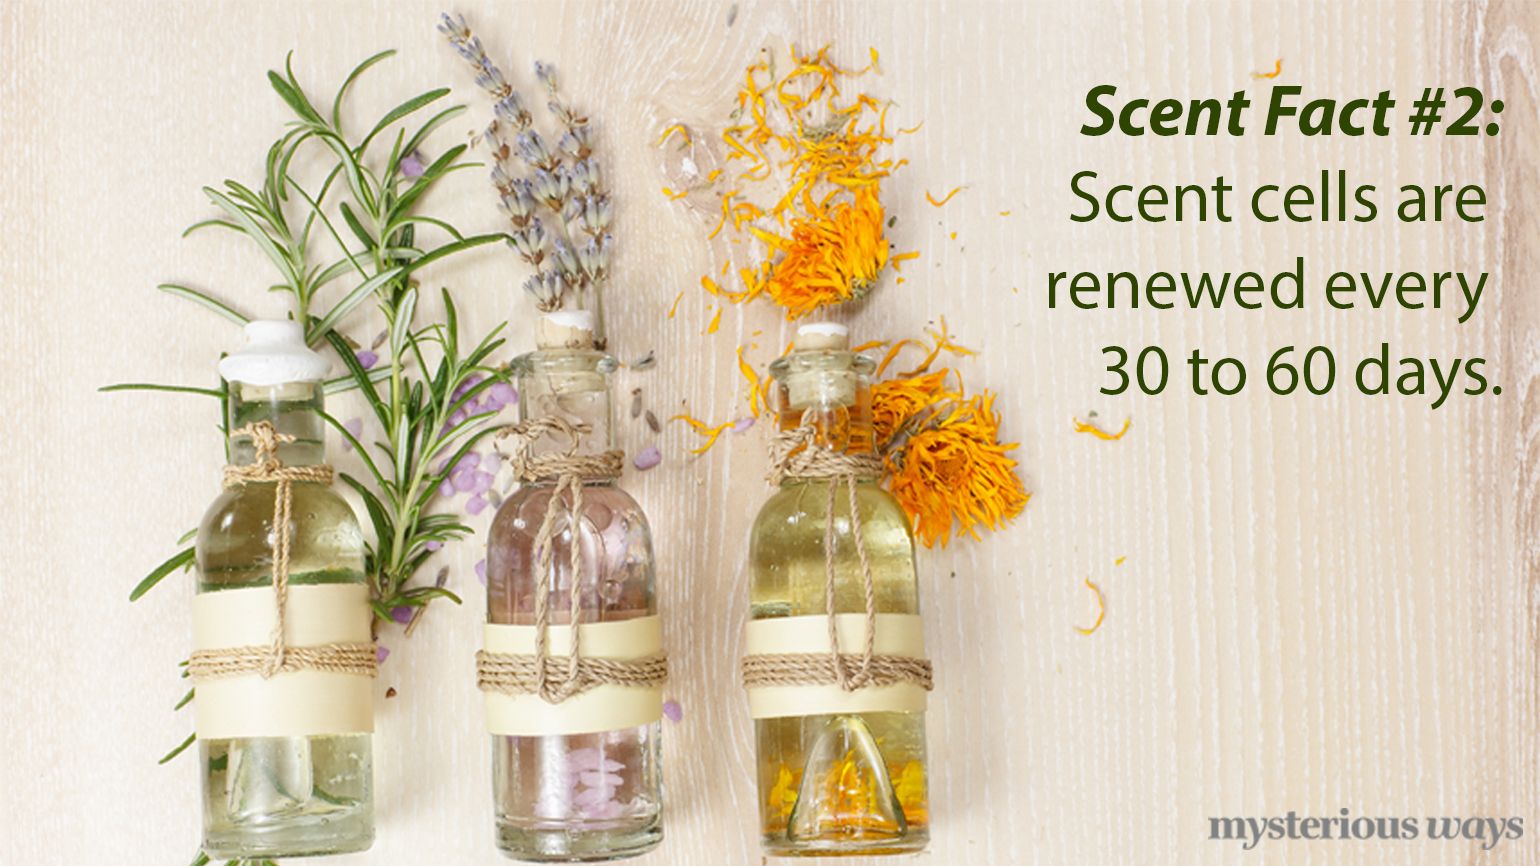 Scent cells are renewed every 30 to 60 days